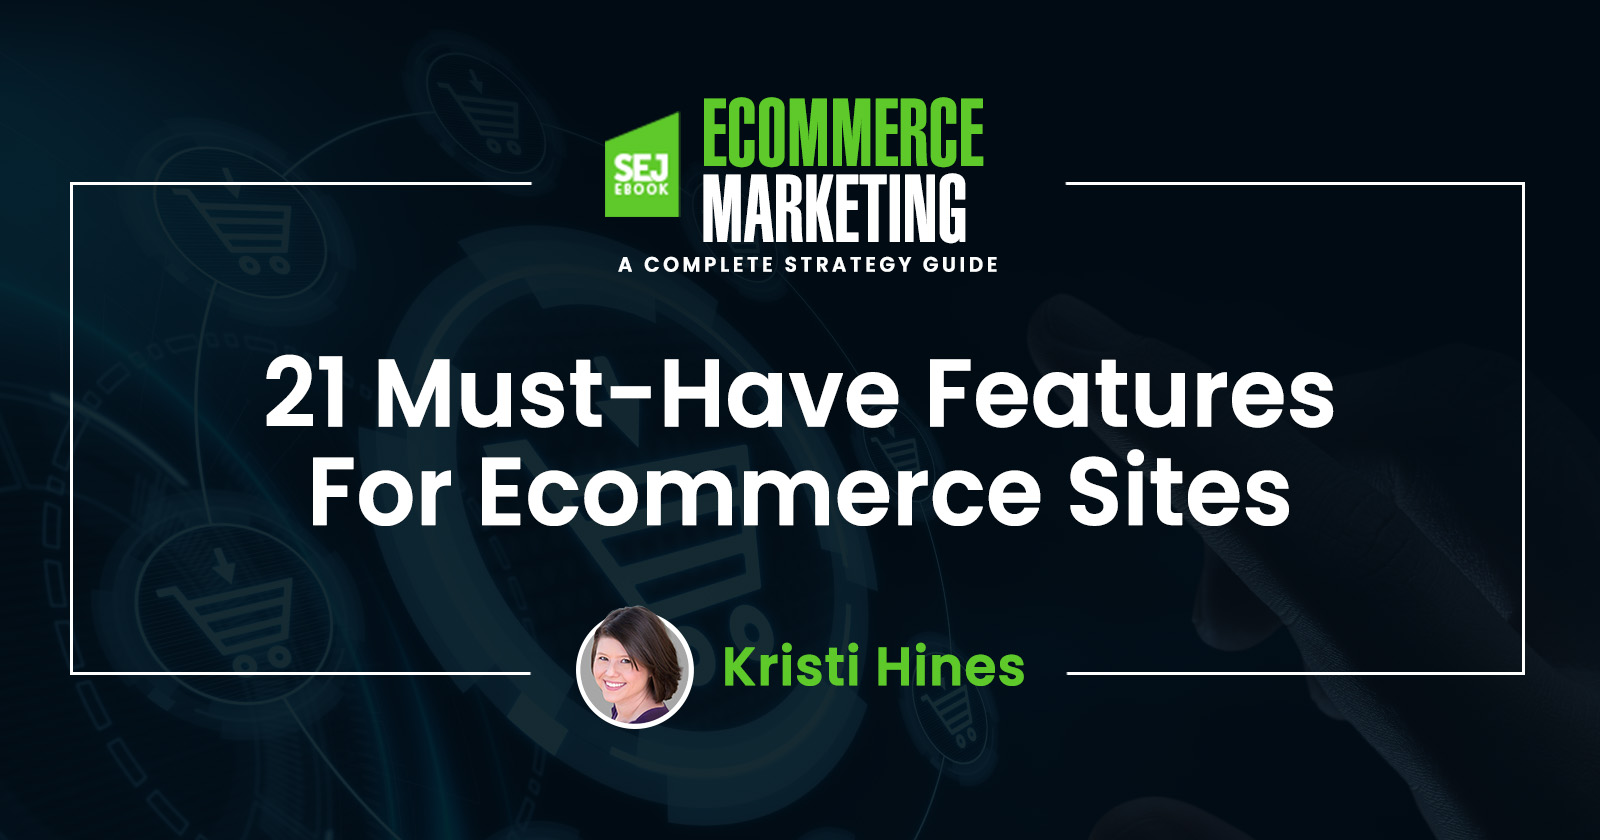 21 Must-Have Features For Ecommerce Sites via @sejournal, @kristileilani